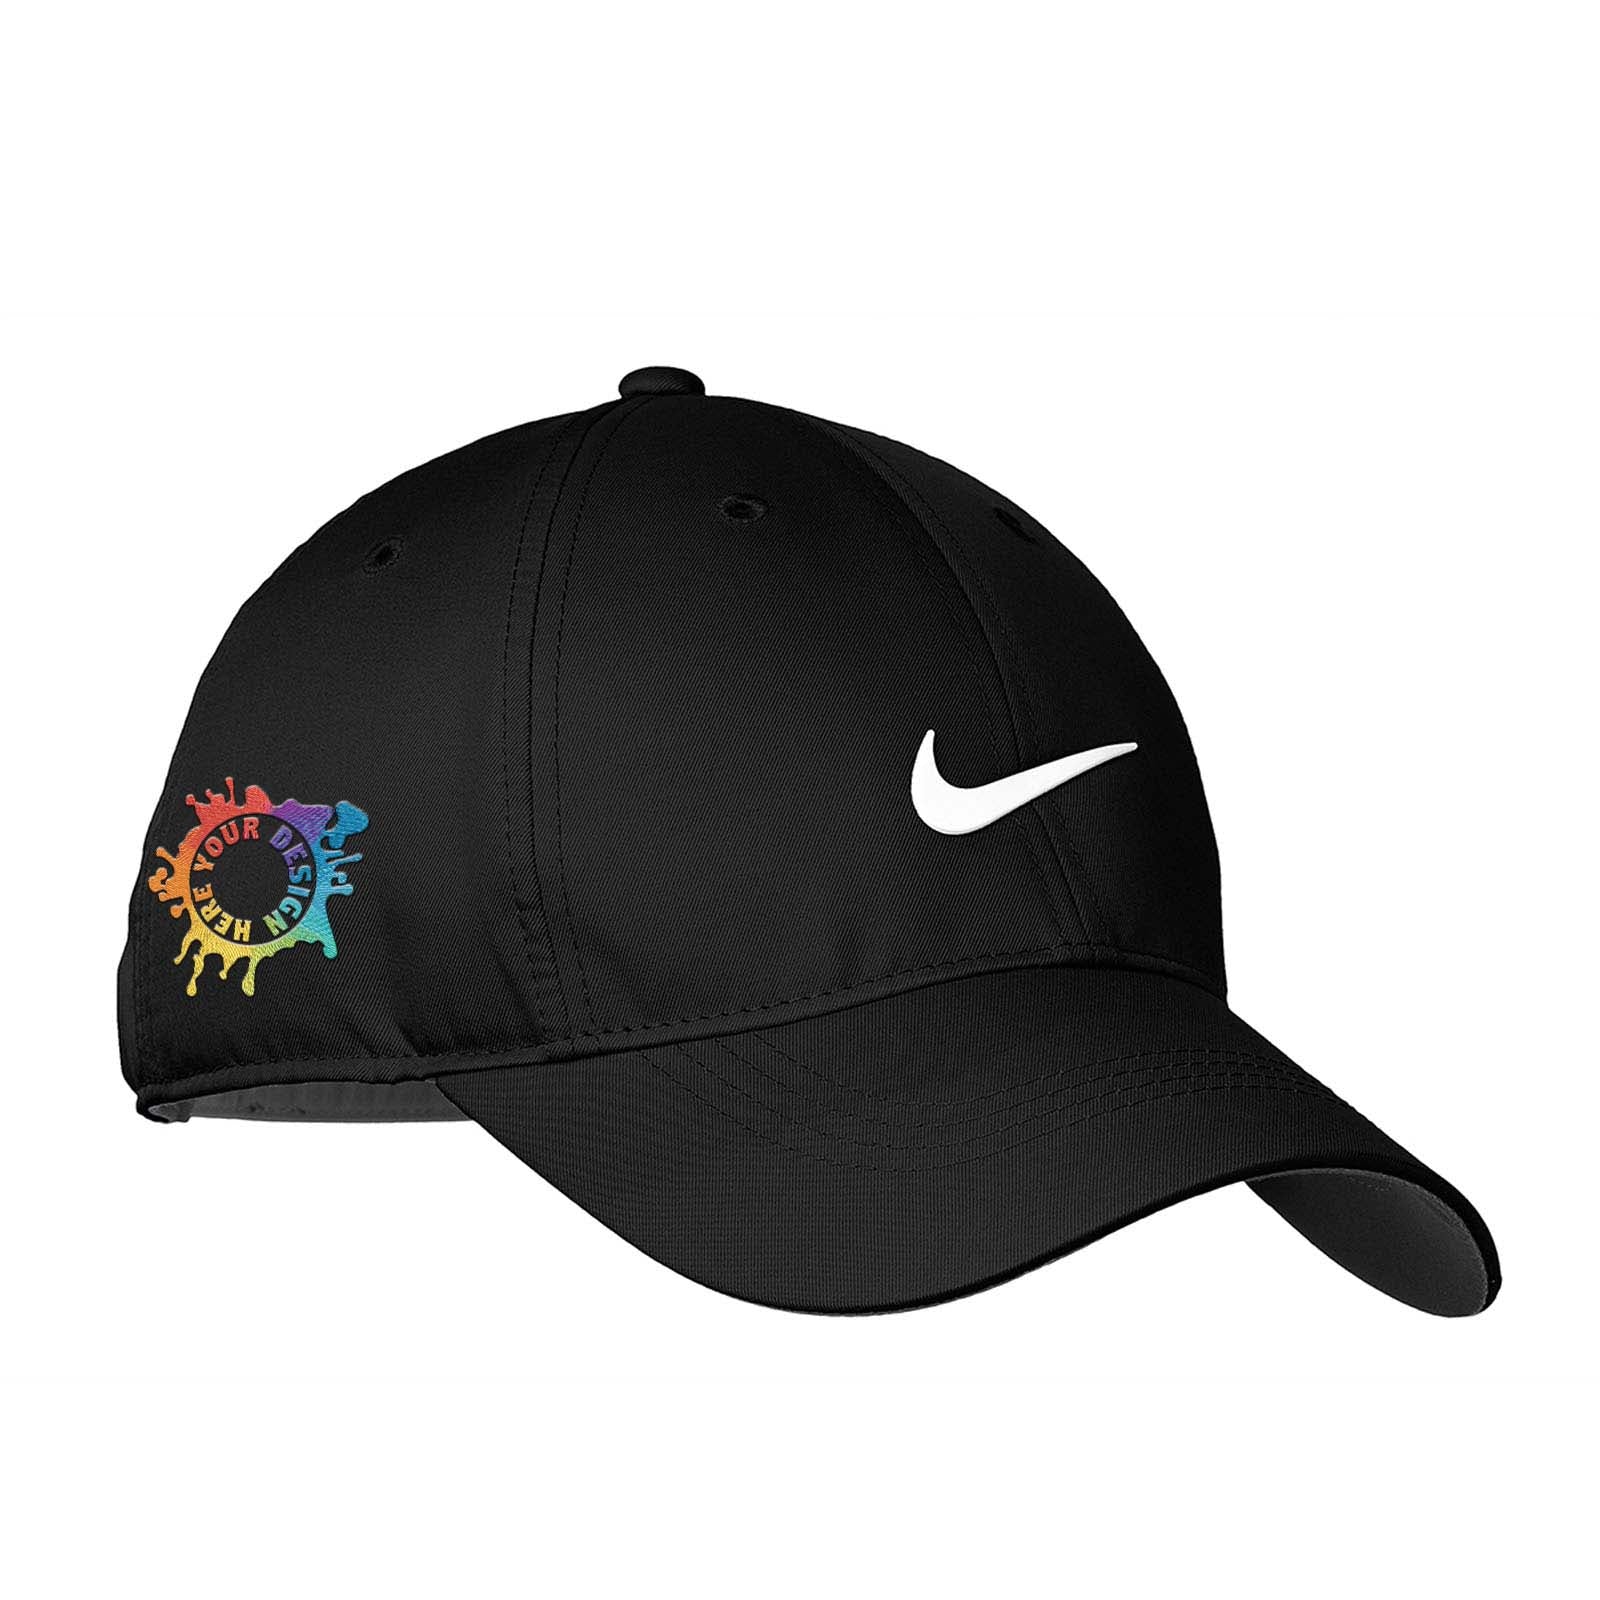 Nike H86 embroidered swoosh cap in black